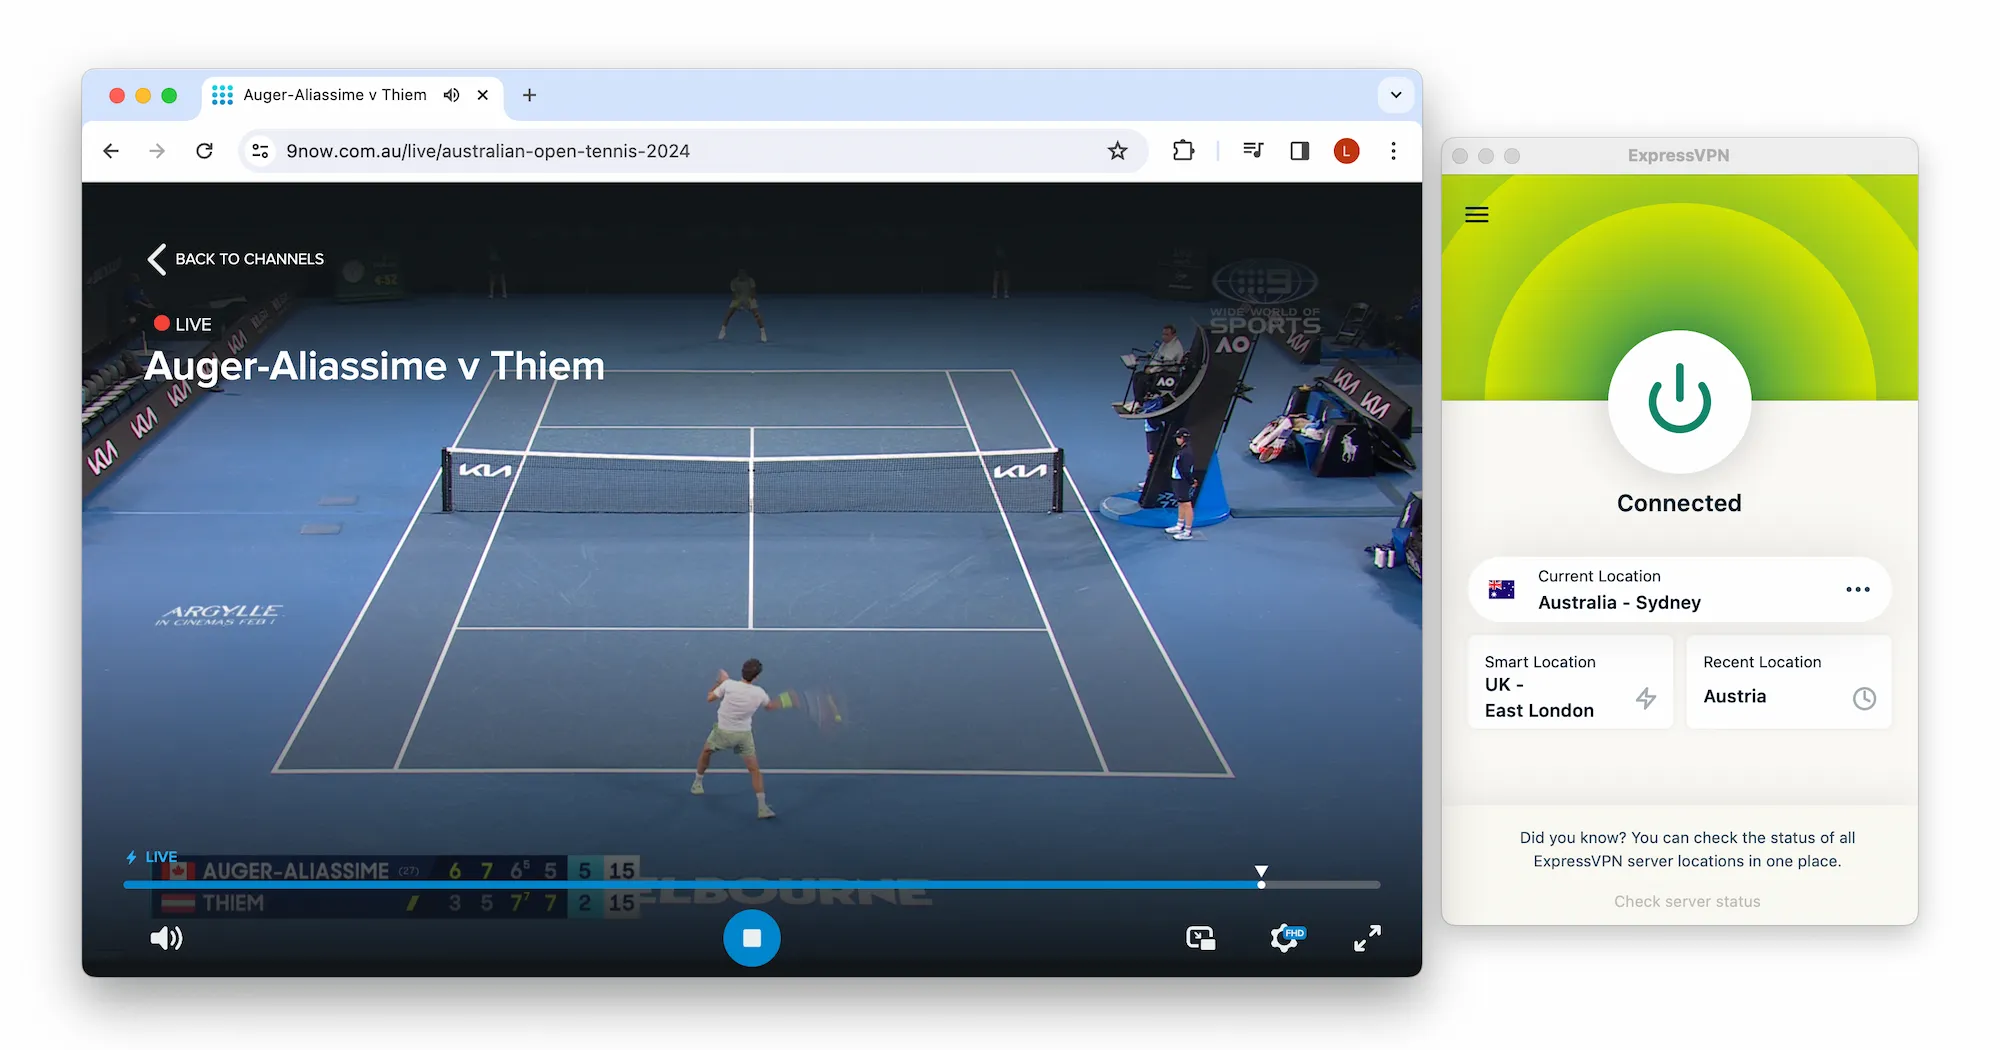 Accessing live streams of the Australian Open on 9Now using ExpressVPN.